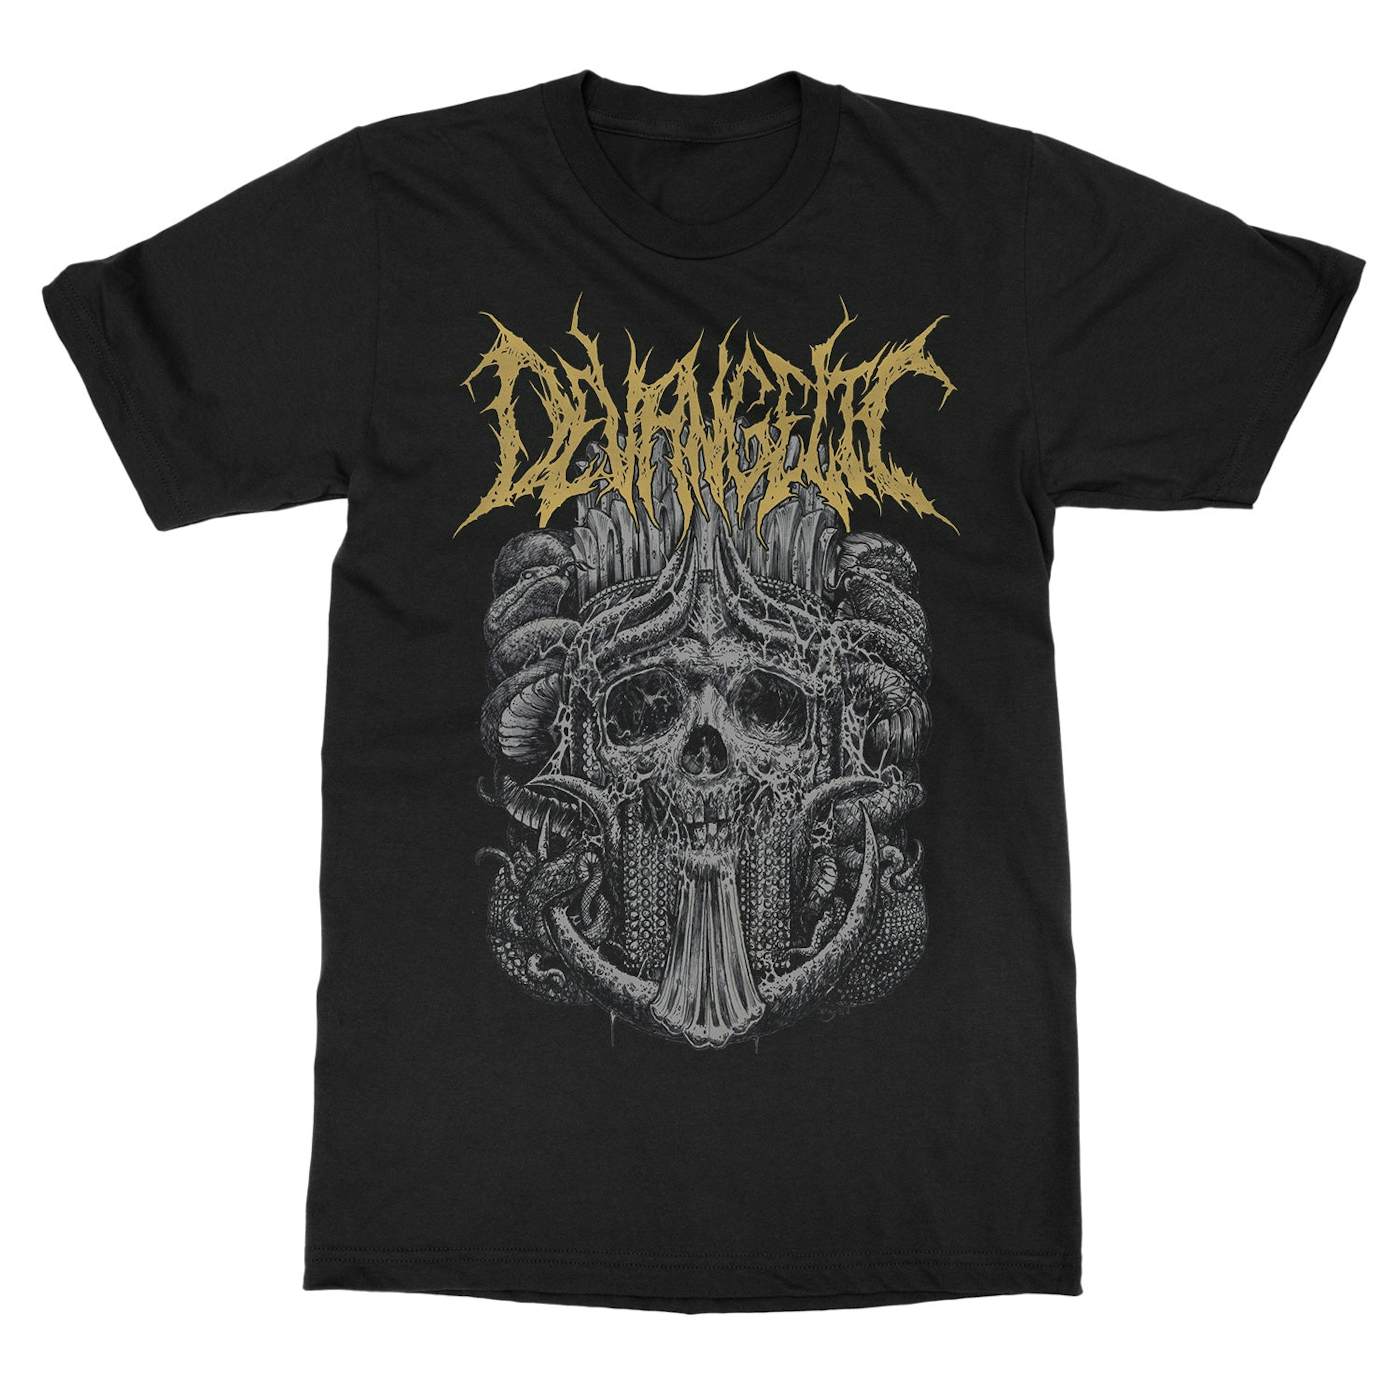 Årabrot Devangelic "Becoming One With The Dead" T-Shirt